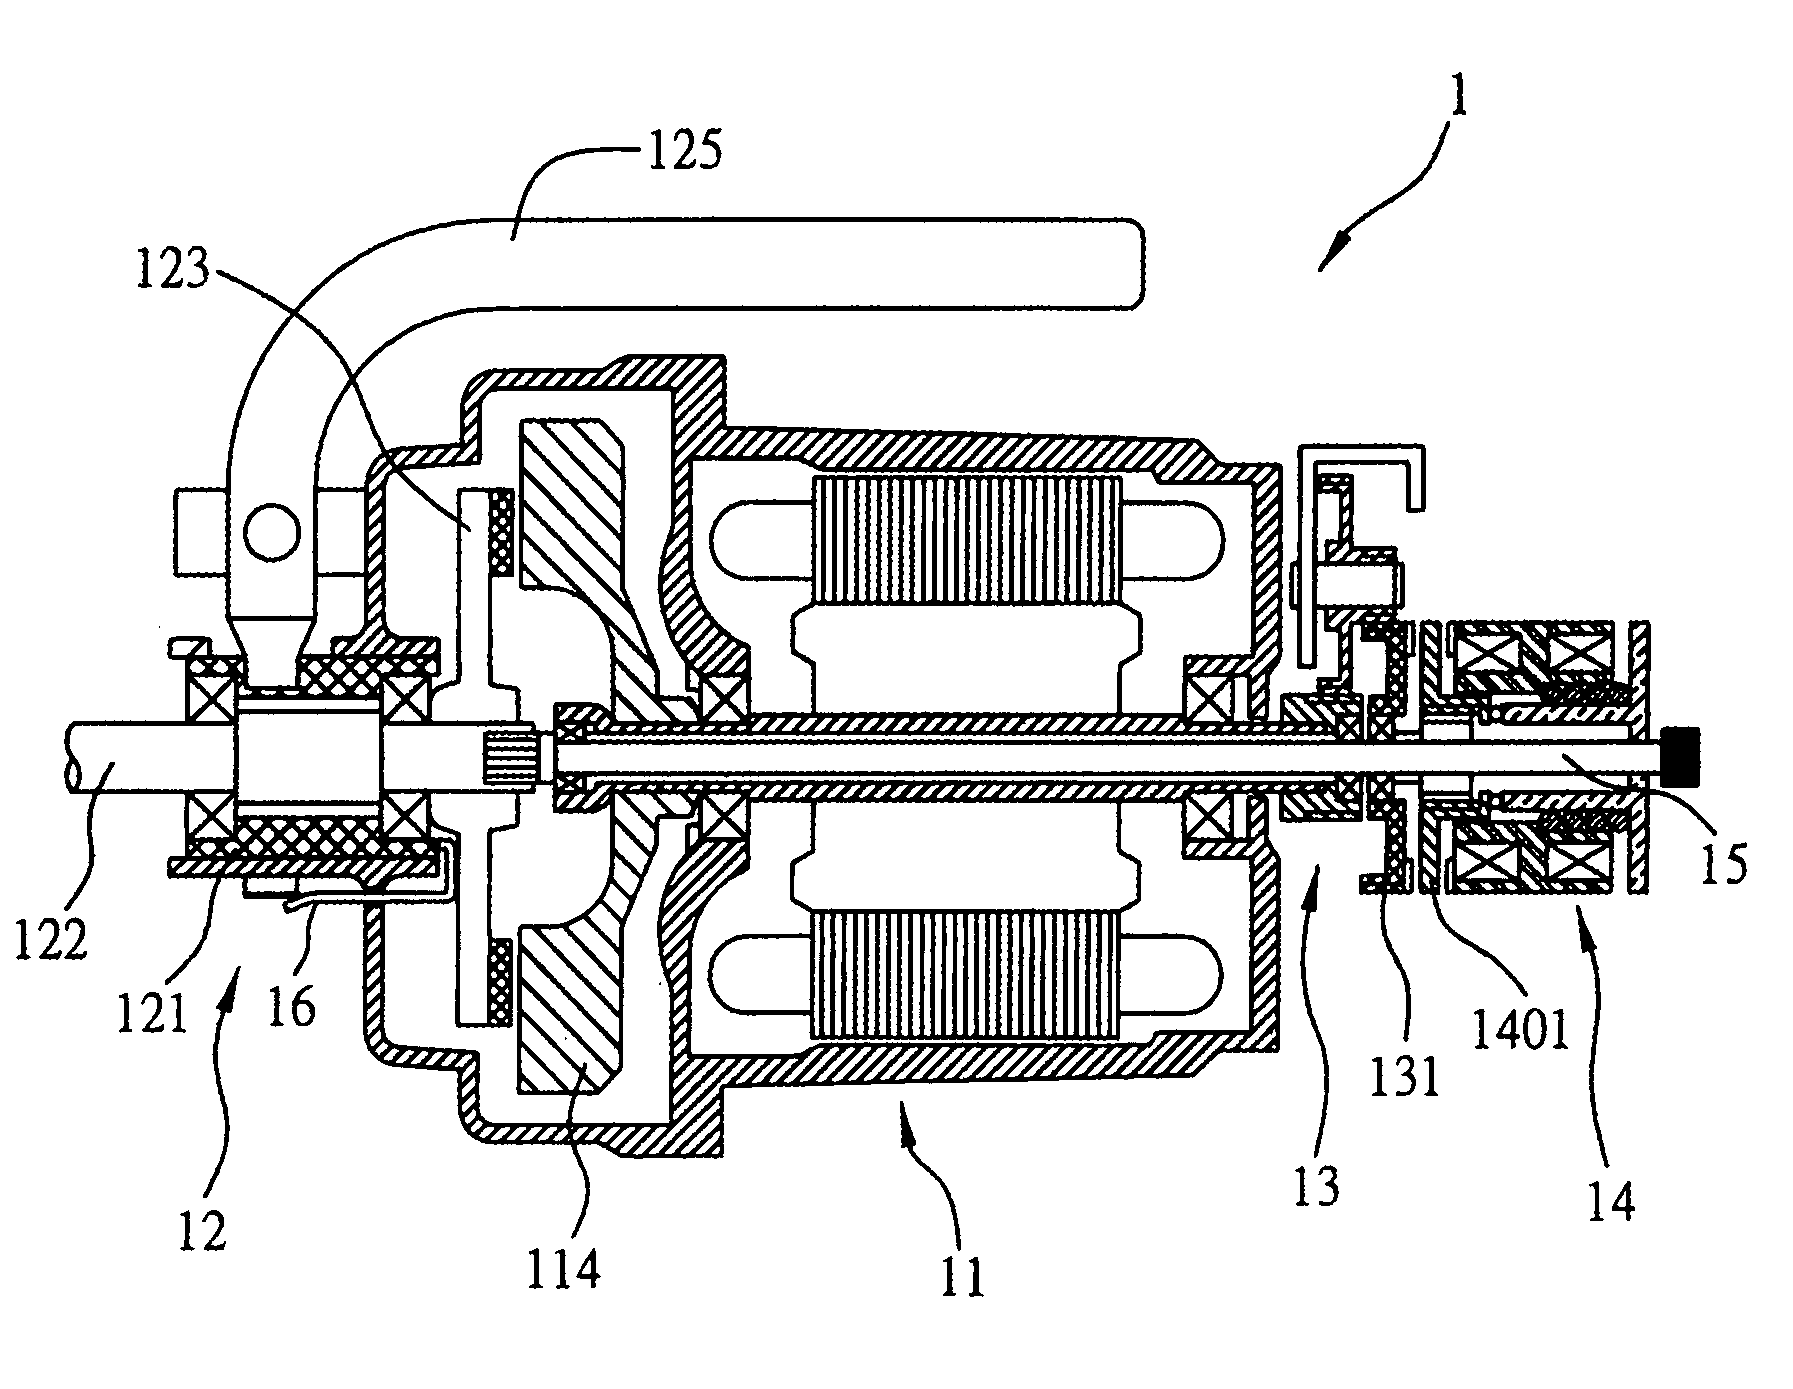 Motor system for sewing machine